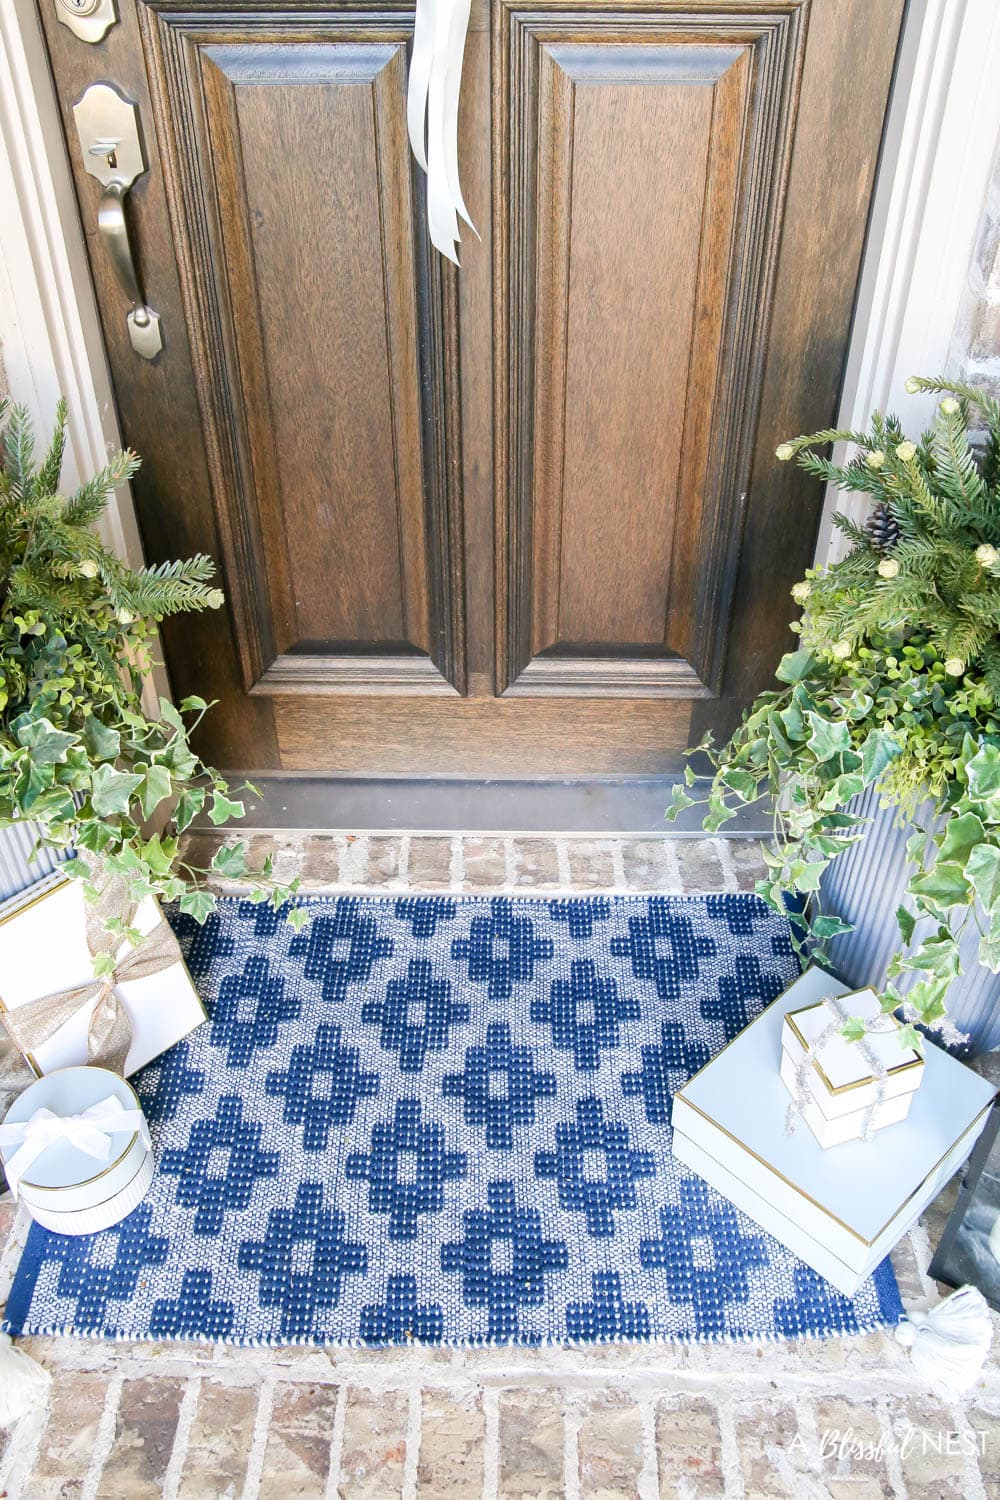 Brick entryway with solid wood door, pine wreath with a white satin ribbon, blue and white doormat with planters and black lanterns with gift boxes tucked next to them.